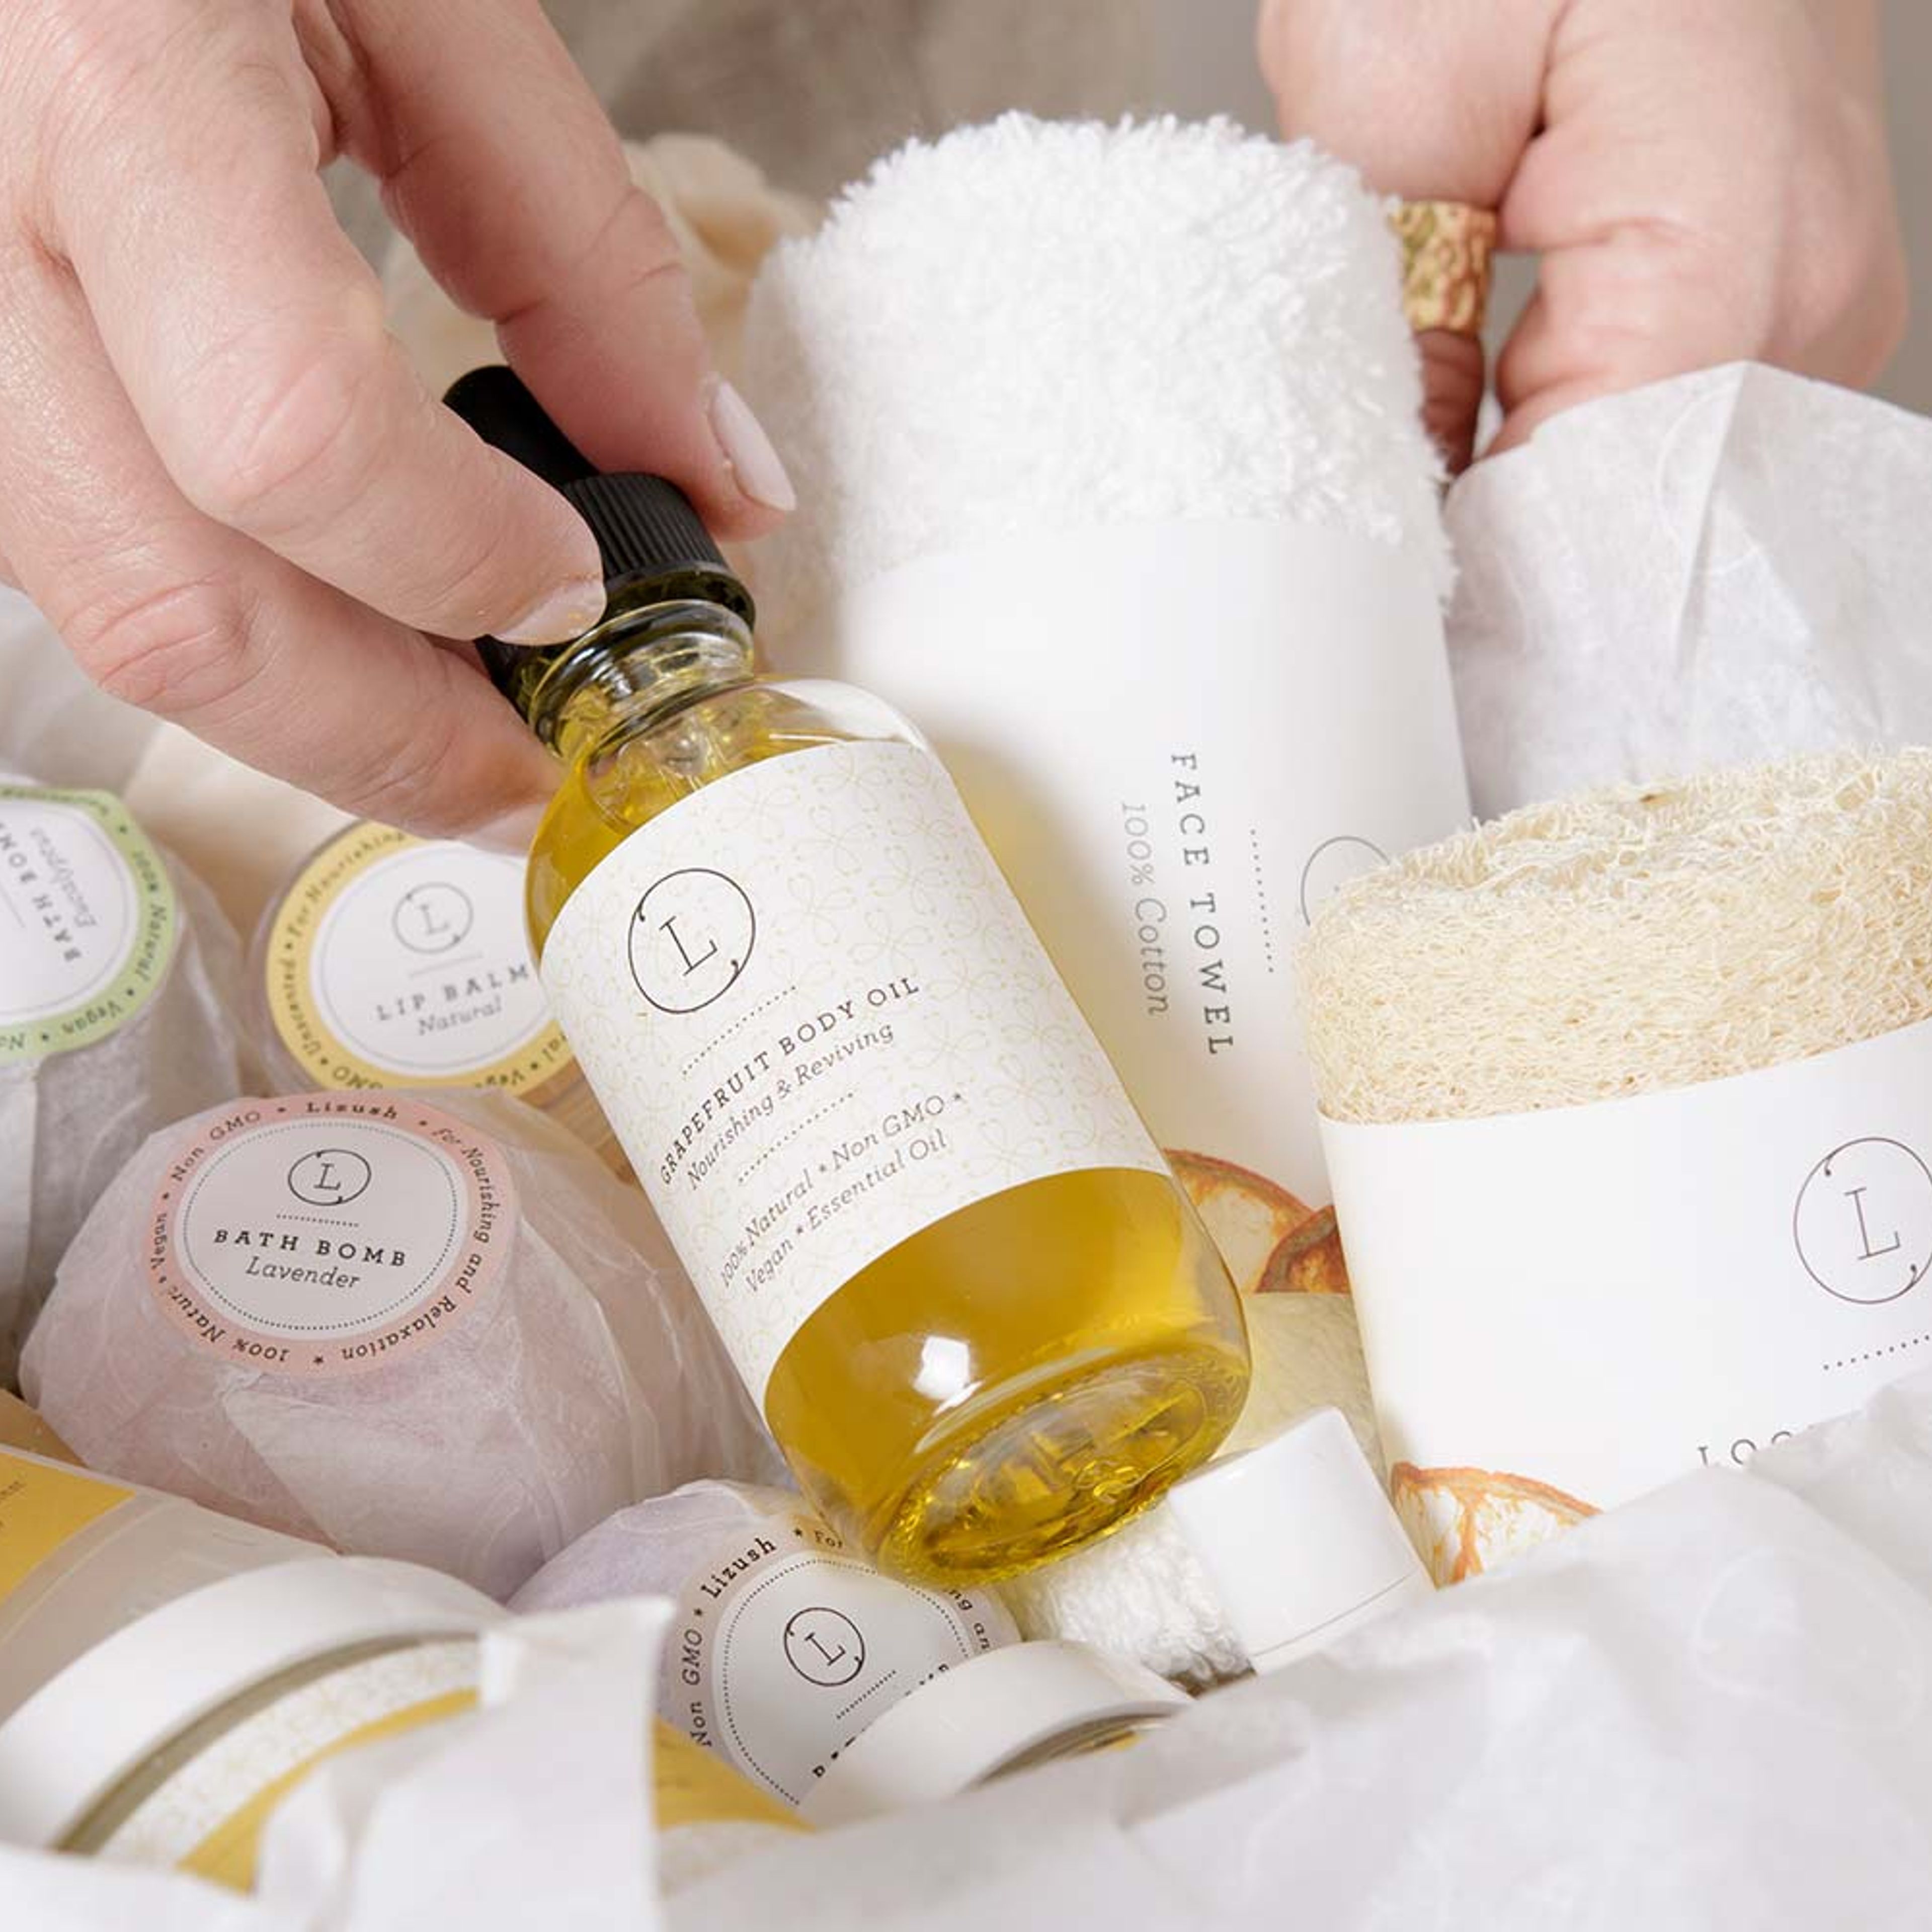 One year of self-care SUBSCRIPTION BOXES for WOMEN - Will be shipped every 3 months